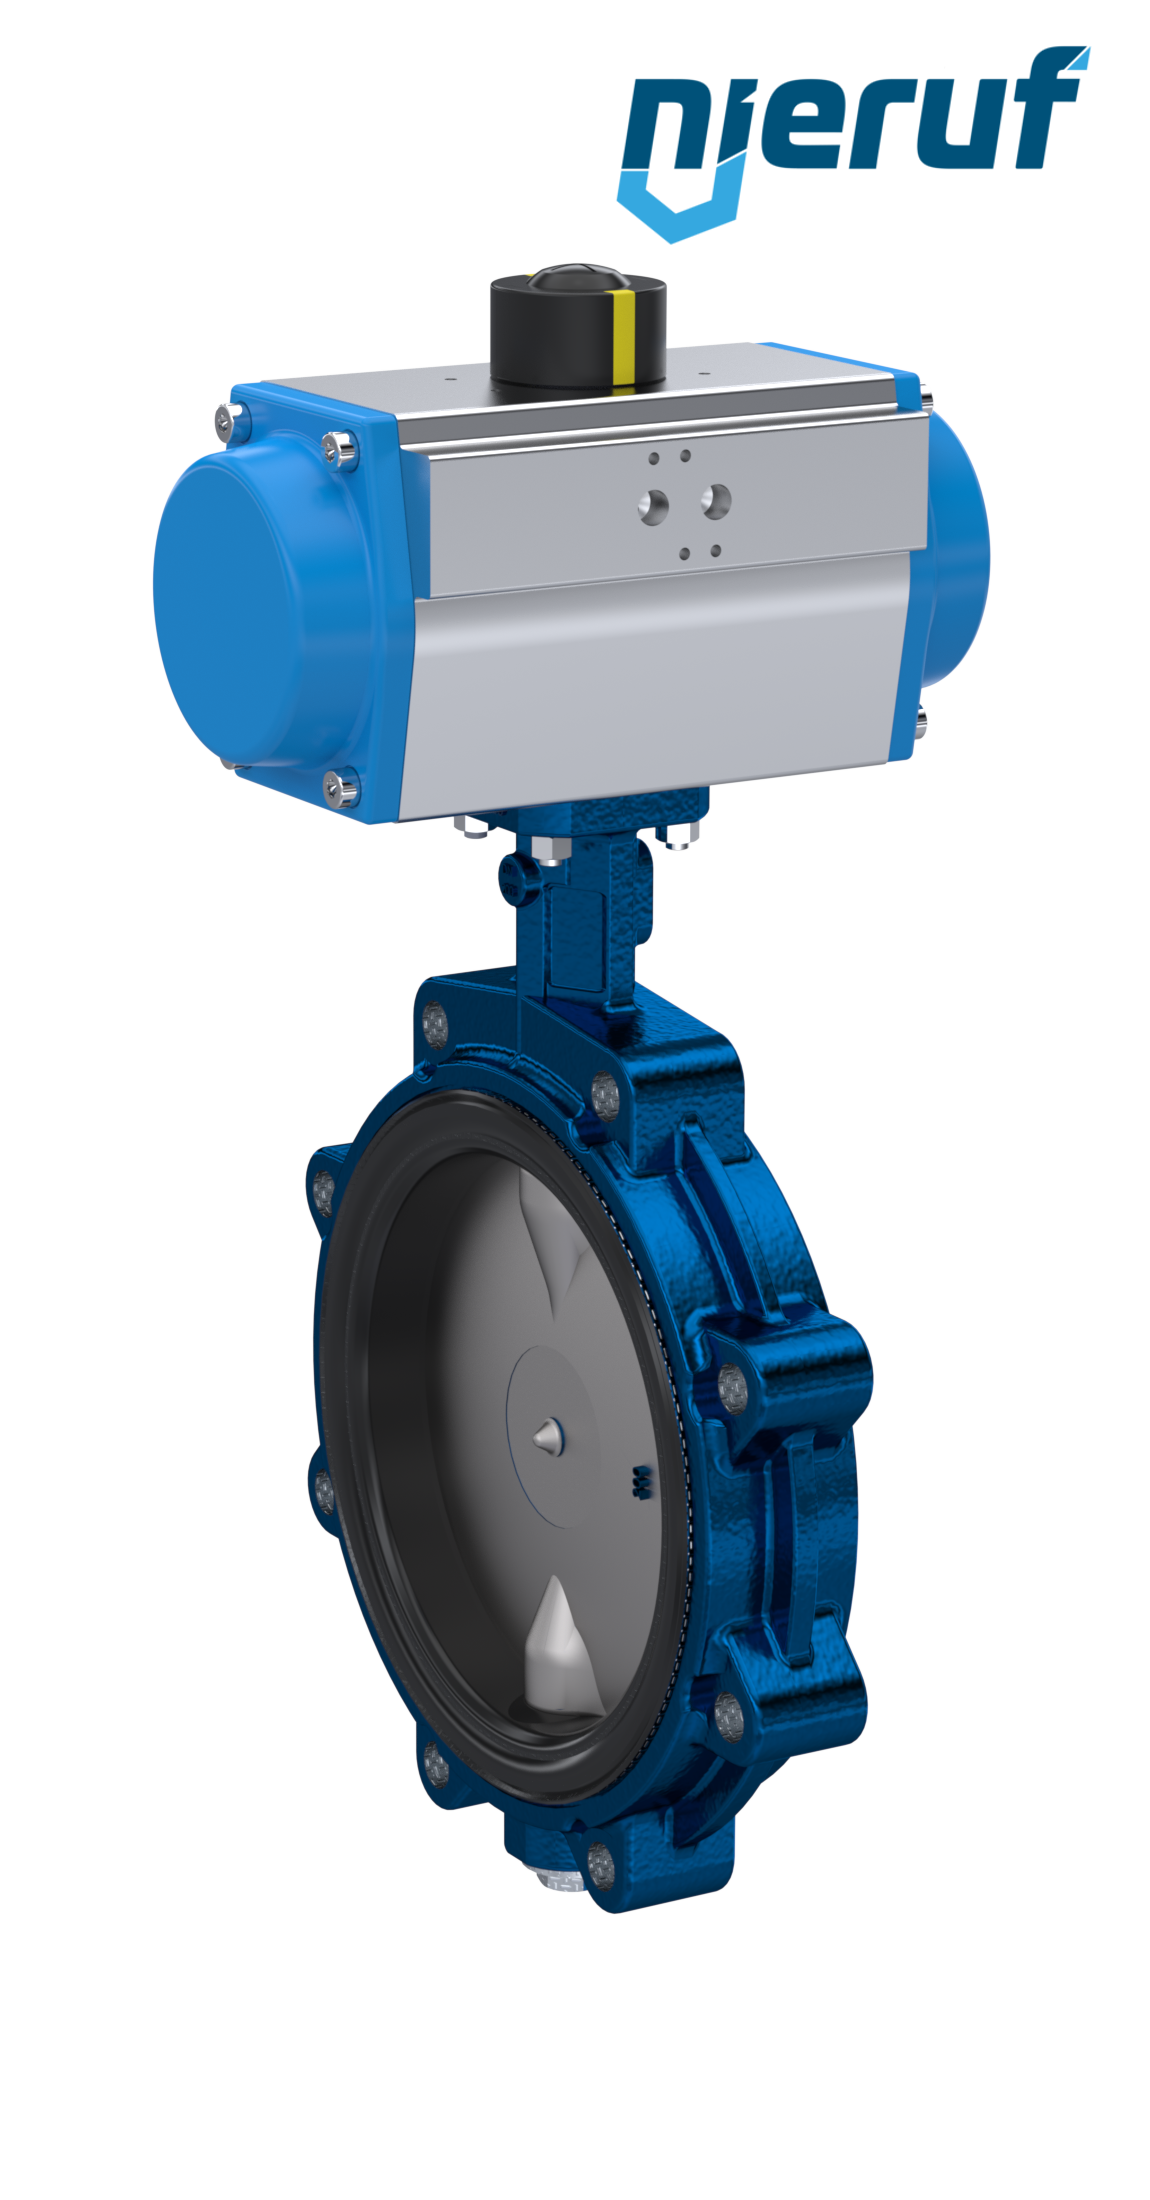 Butterfly valve DN 100 AK02 EPDM DVGW drinking water, WRAS, ACS, W270 pneumatic actuator double acting